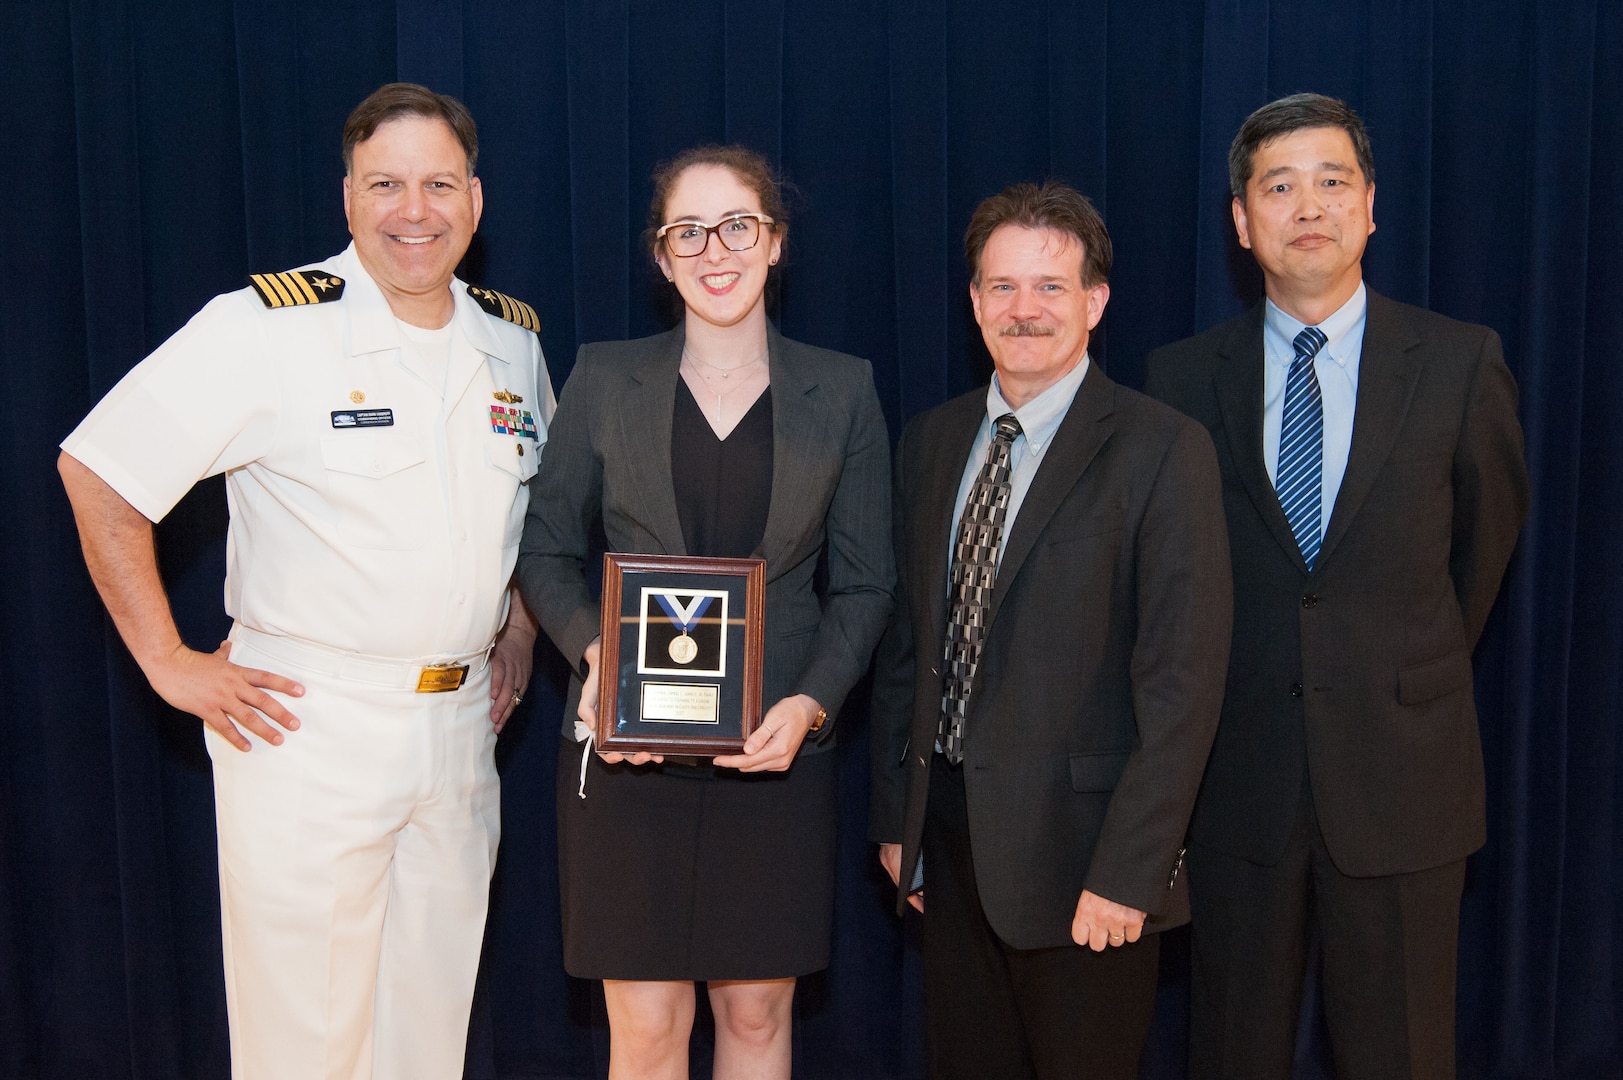 Stephanie Ferrone, a physicist in Carderock's Underwater Electromagnetic Signatures and Technology Division, receives the Vice Adm. Samuel L. Gravely Jr. Award for achievement in equity and diversity at the Naval Surface Warfare Center, Carderock Division Honor Awards ceremony Aug. 28, 2018, in West Bethesda, Md. From left to right: Commanding Officer Capt. Mark Vandroff; Ferrone; Mike Slater, division head of Carderock's Signatures Measurement Technologies and Systems Division; and Paul Shang, Carderock's acting technical director. (U.S. Navy photo by Nicholas Brezzell/Released)